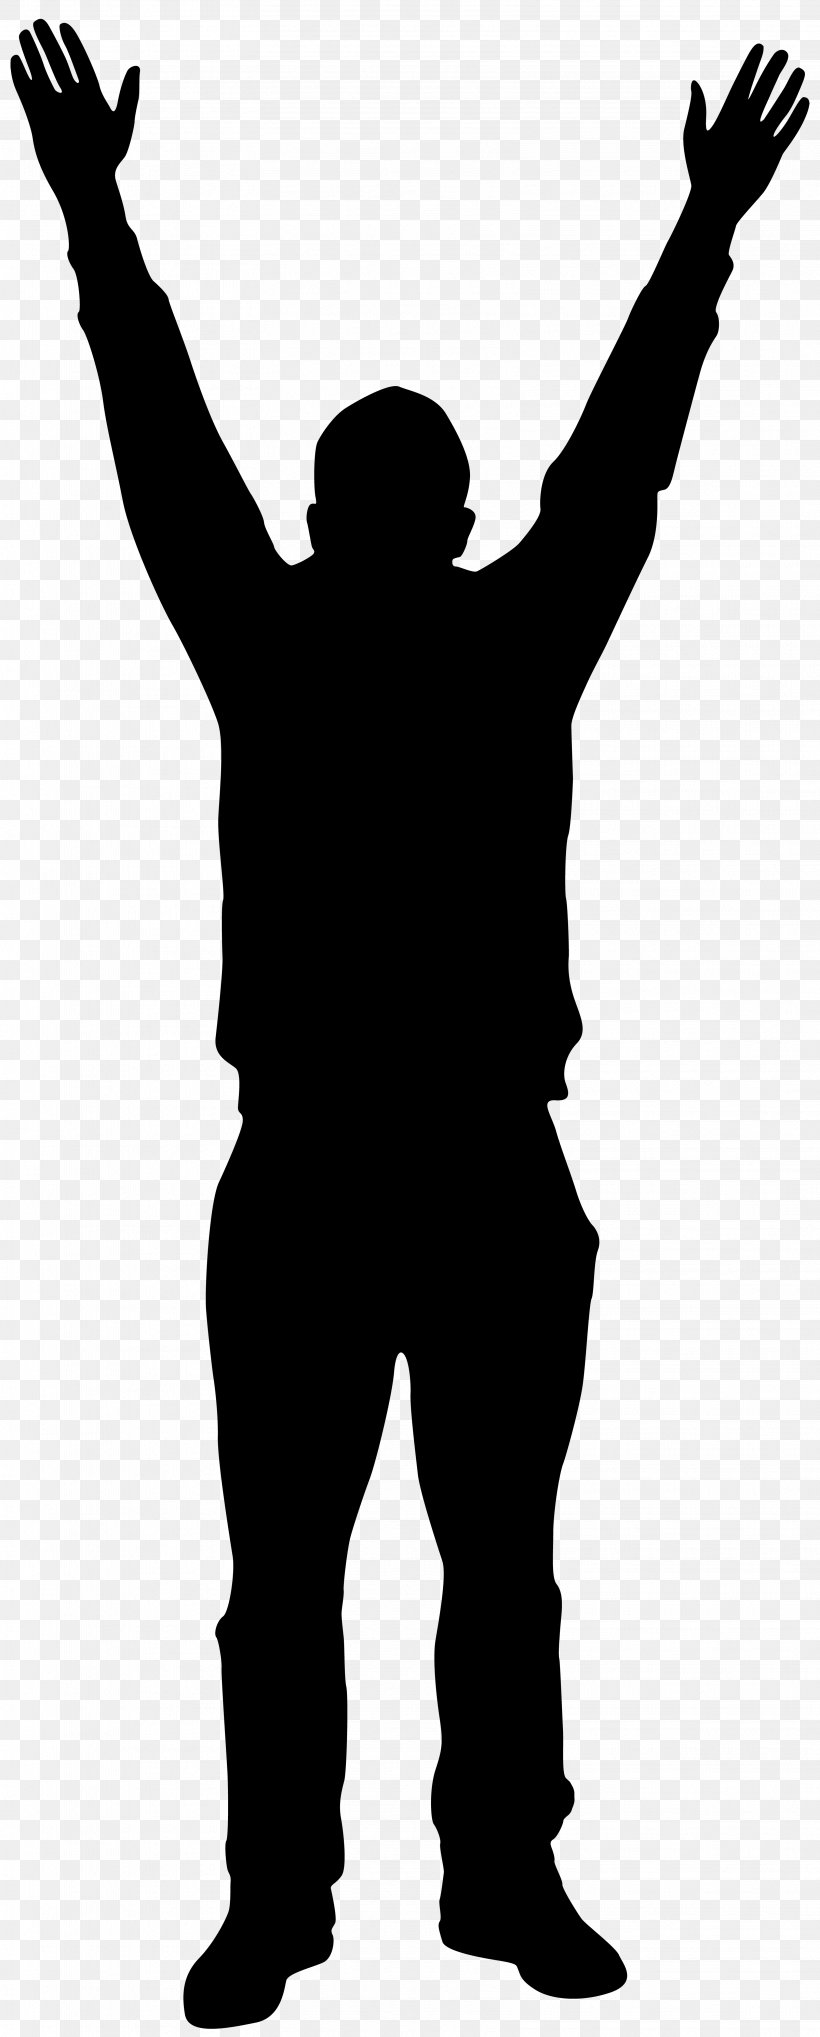 Standing Silhouette Gesture, PNG, 3219x8000px, Standing, Gesture, Silhouette Download Free